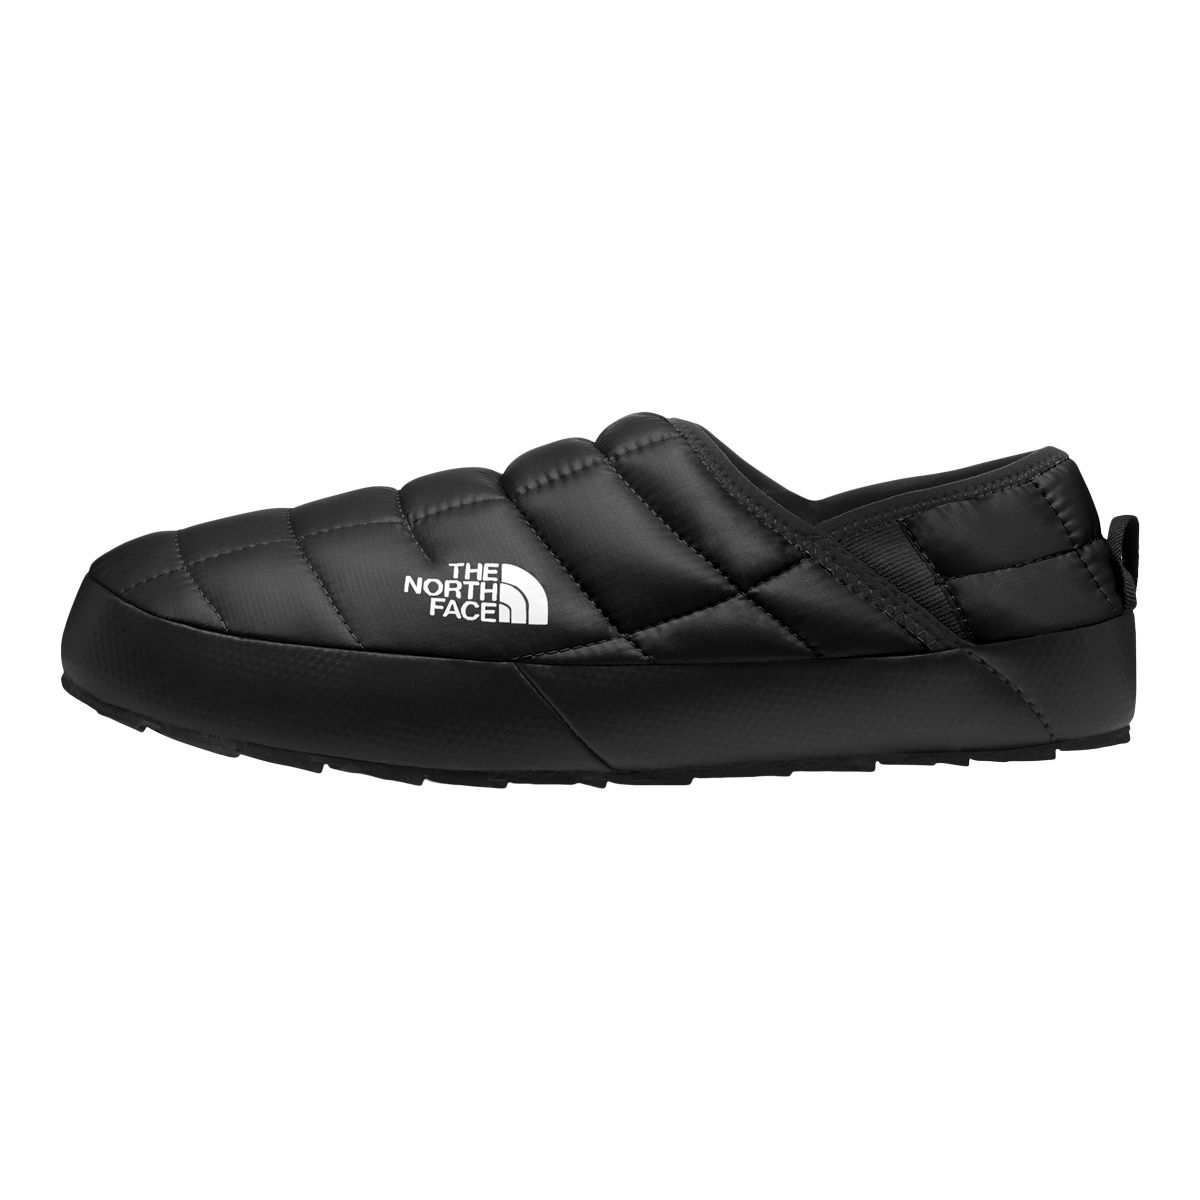 The North Face Men's ThermoBall™ Traction V Mule Slippers  Slip On Indoor Outdoor Snow